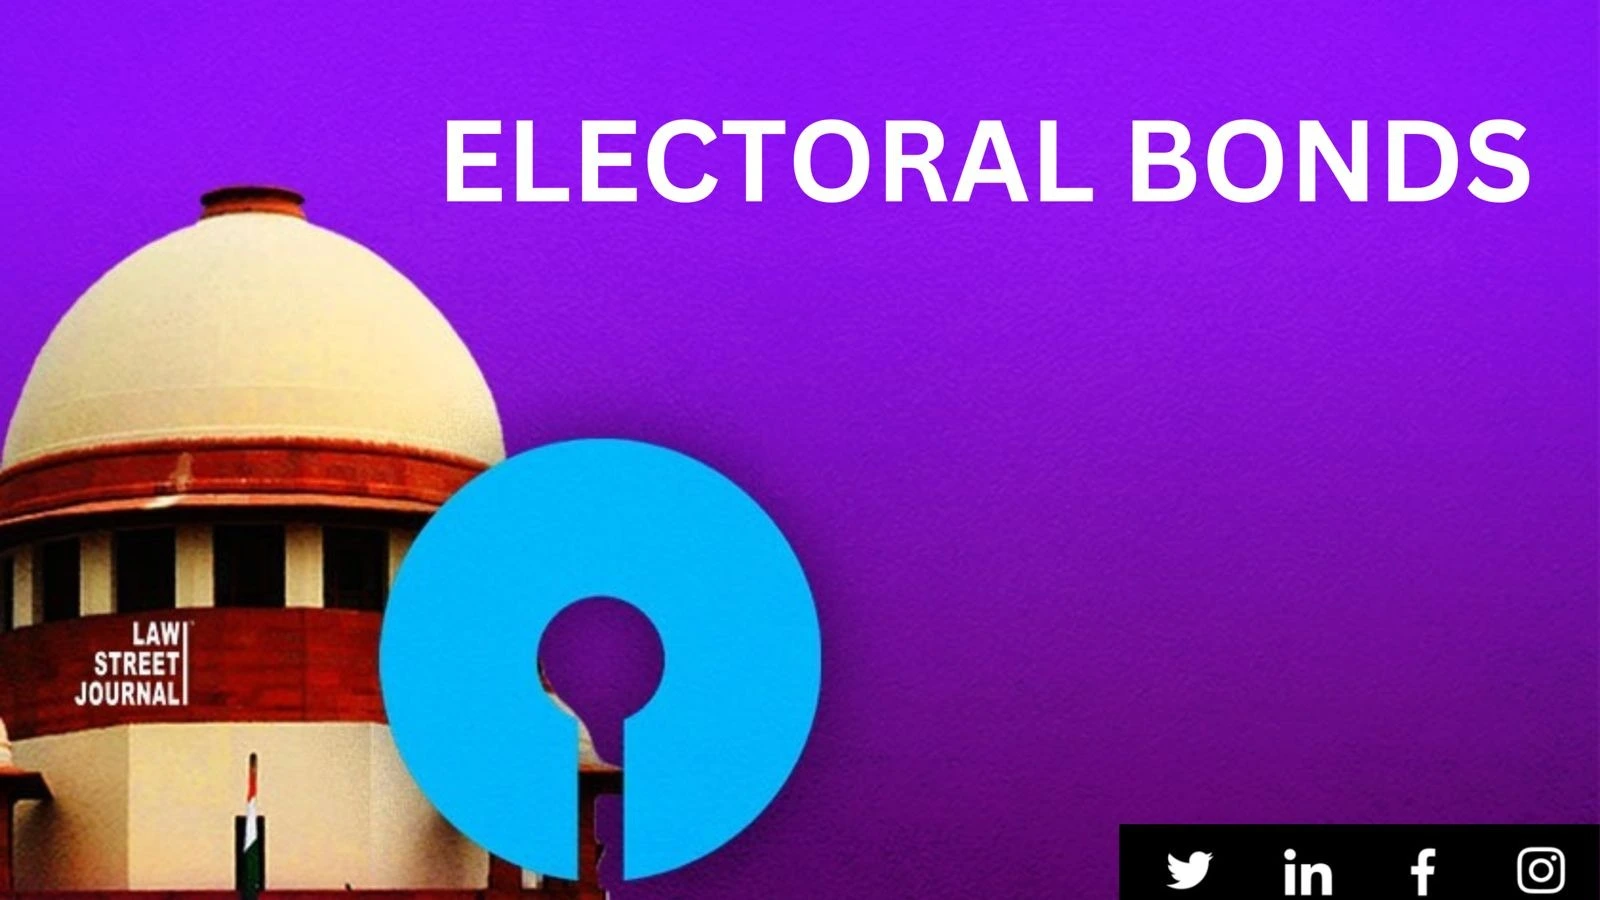 SC tells SBI to provide details of Electoral Bonds by March 12